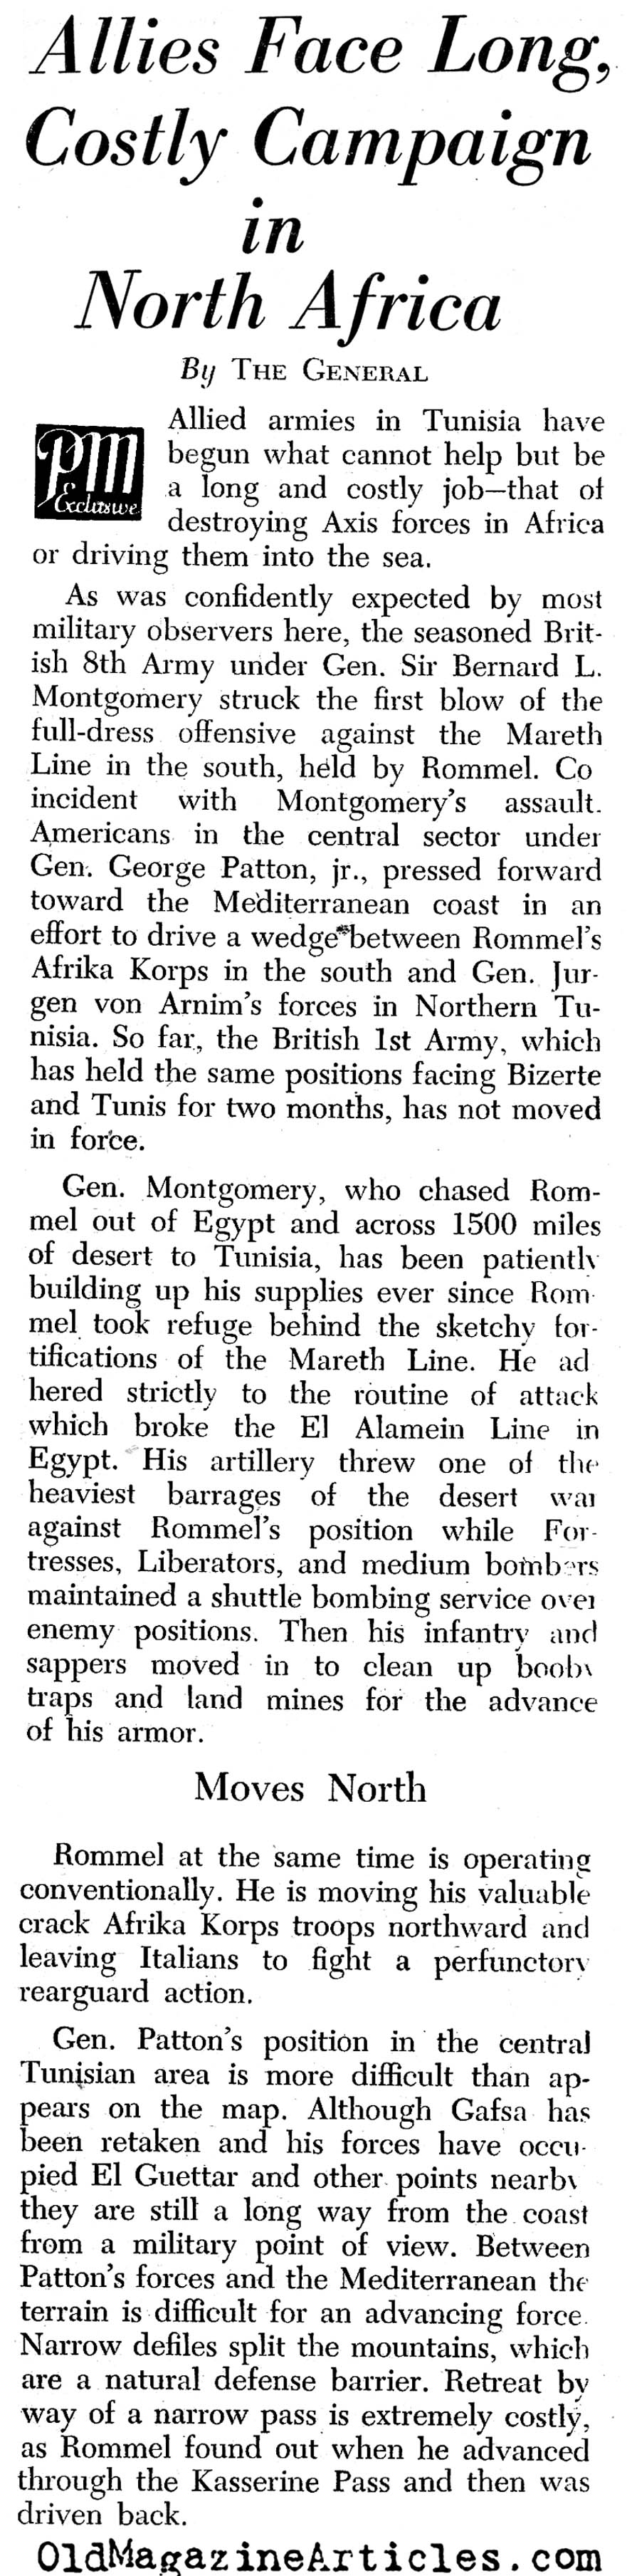 Allied Efforts in North Africa (PM Tabloid, 1943)